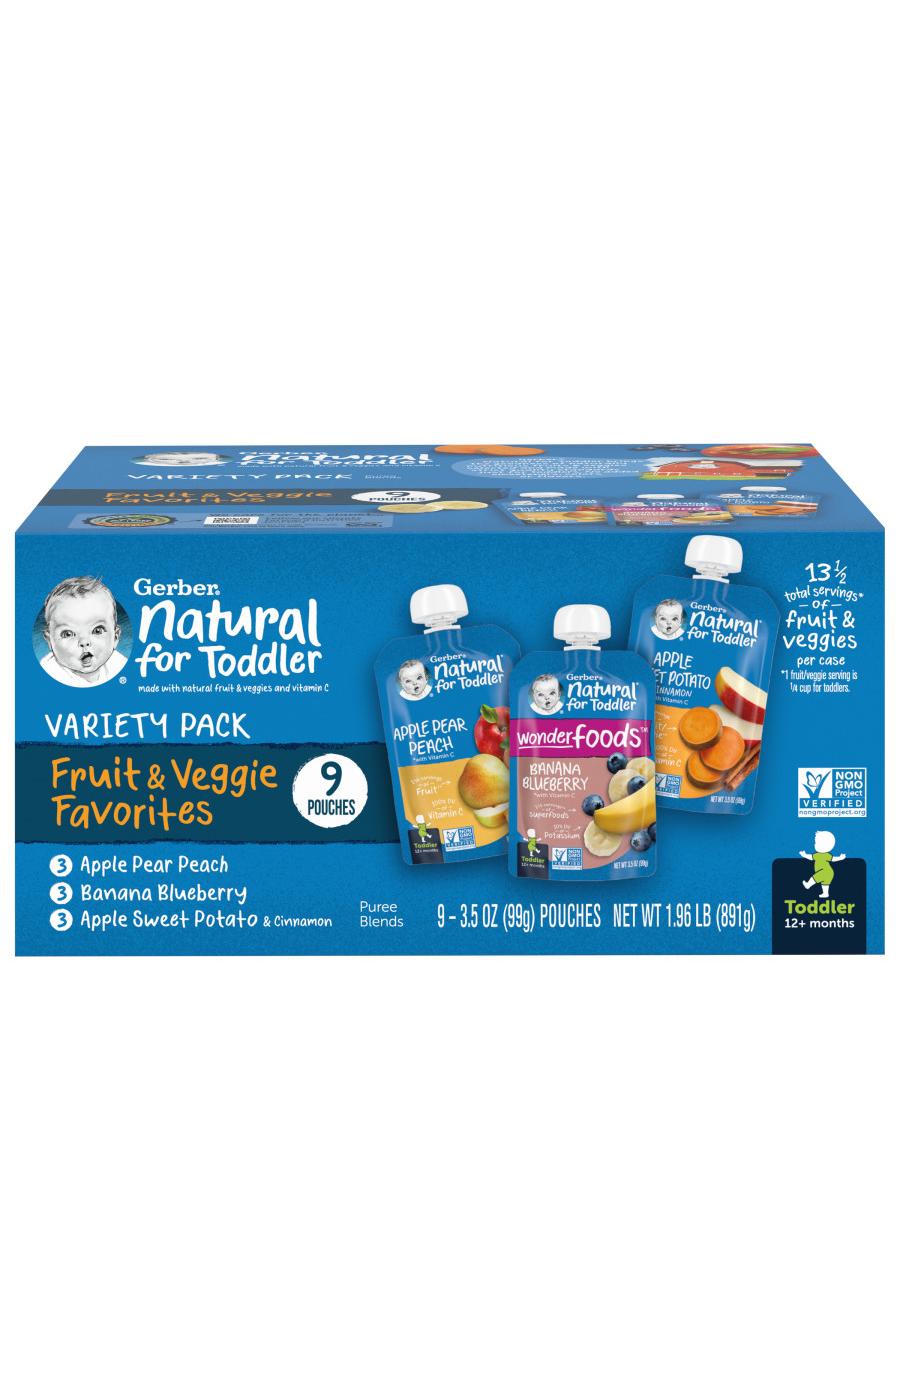 Gerber Natural for Toddler Pouches Variety Pack - Fruit & Veggie Favorites; image 1 of 8